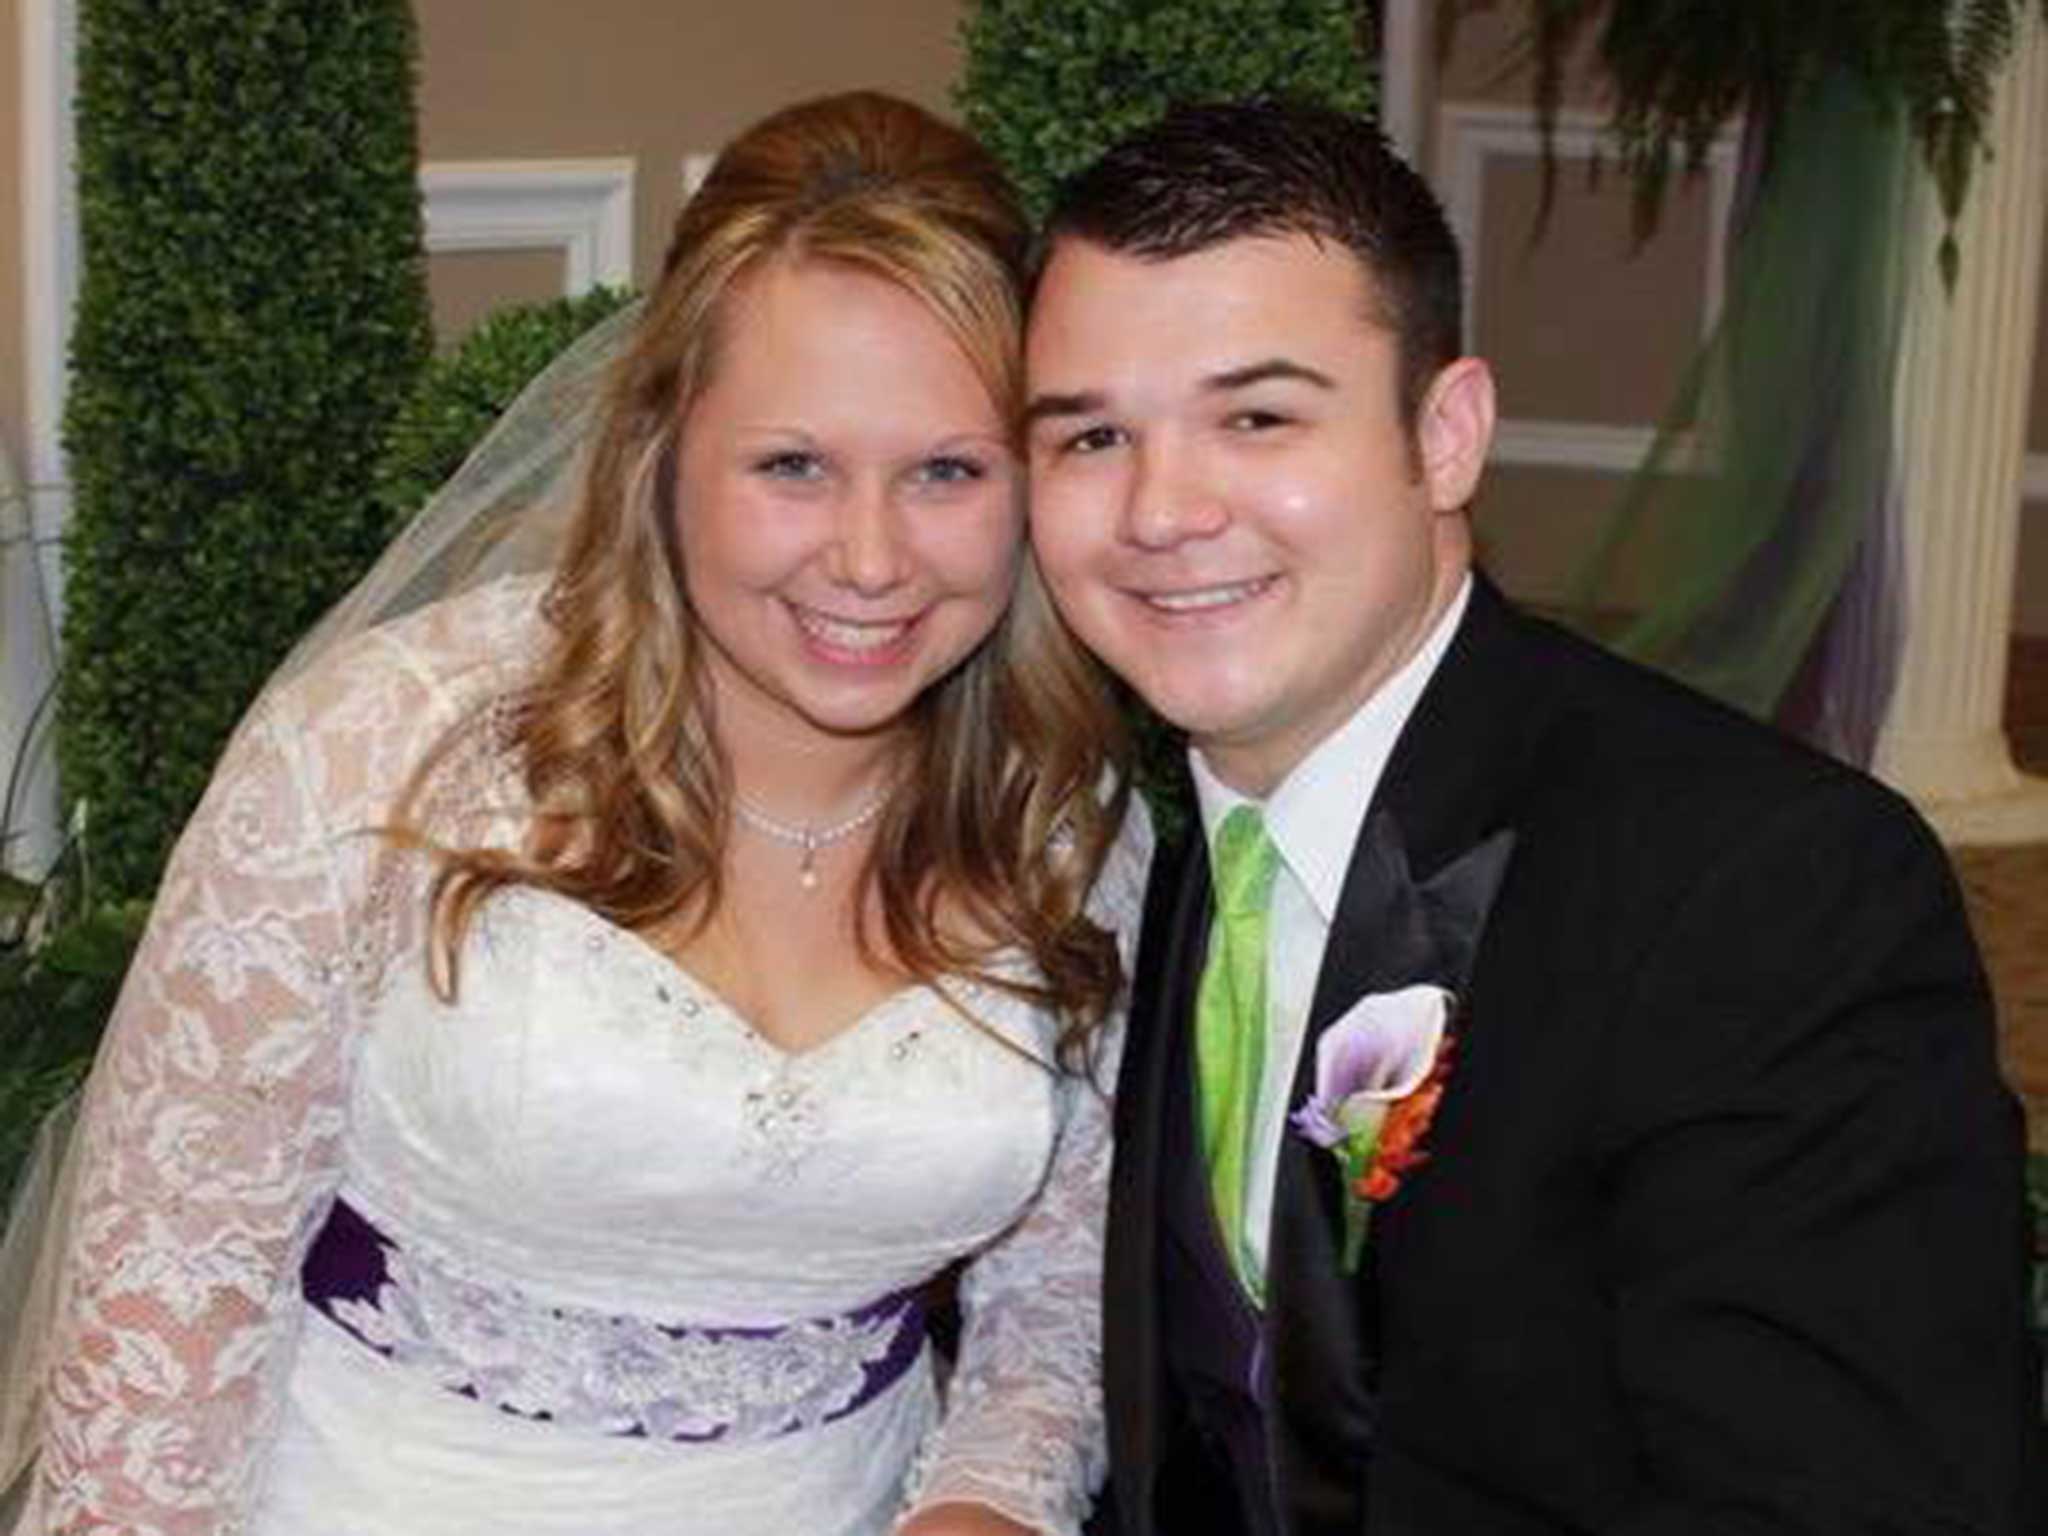 Adrian and Brooke Franklin on their wedding day